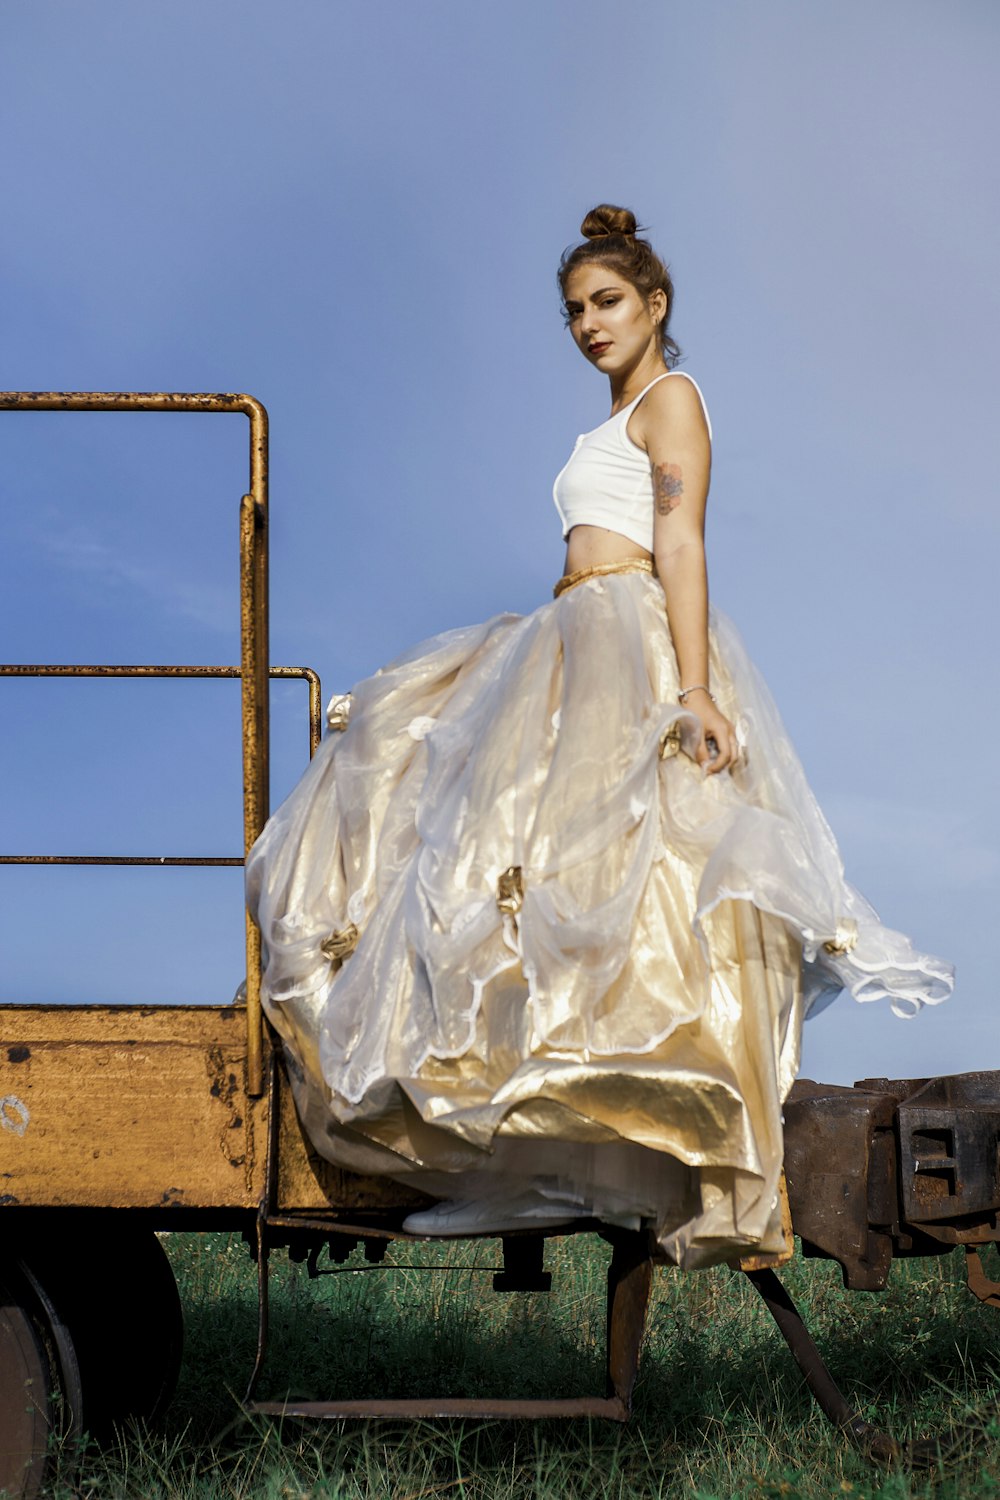 a person in a white dress on a trailer